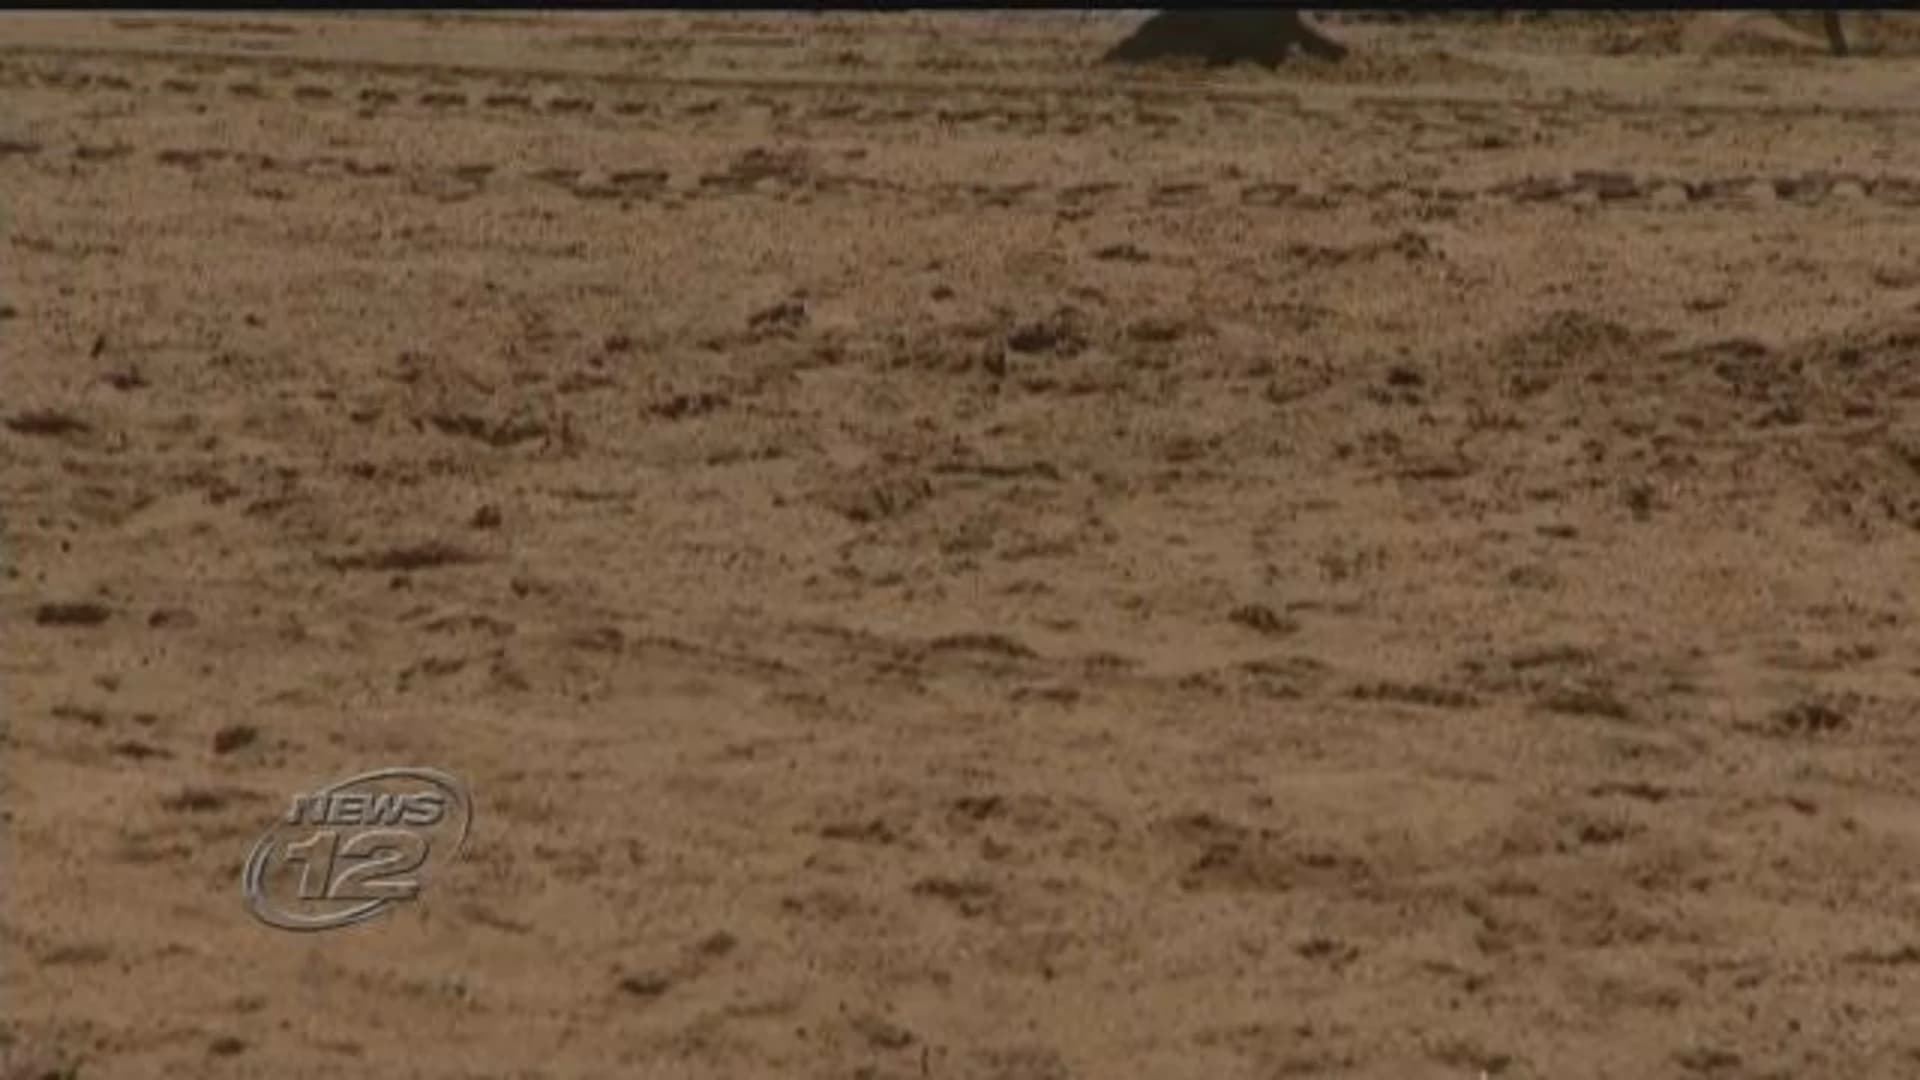 4 Nassau County beaches closed due to sewage spill